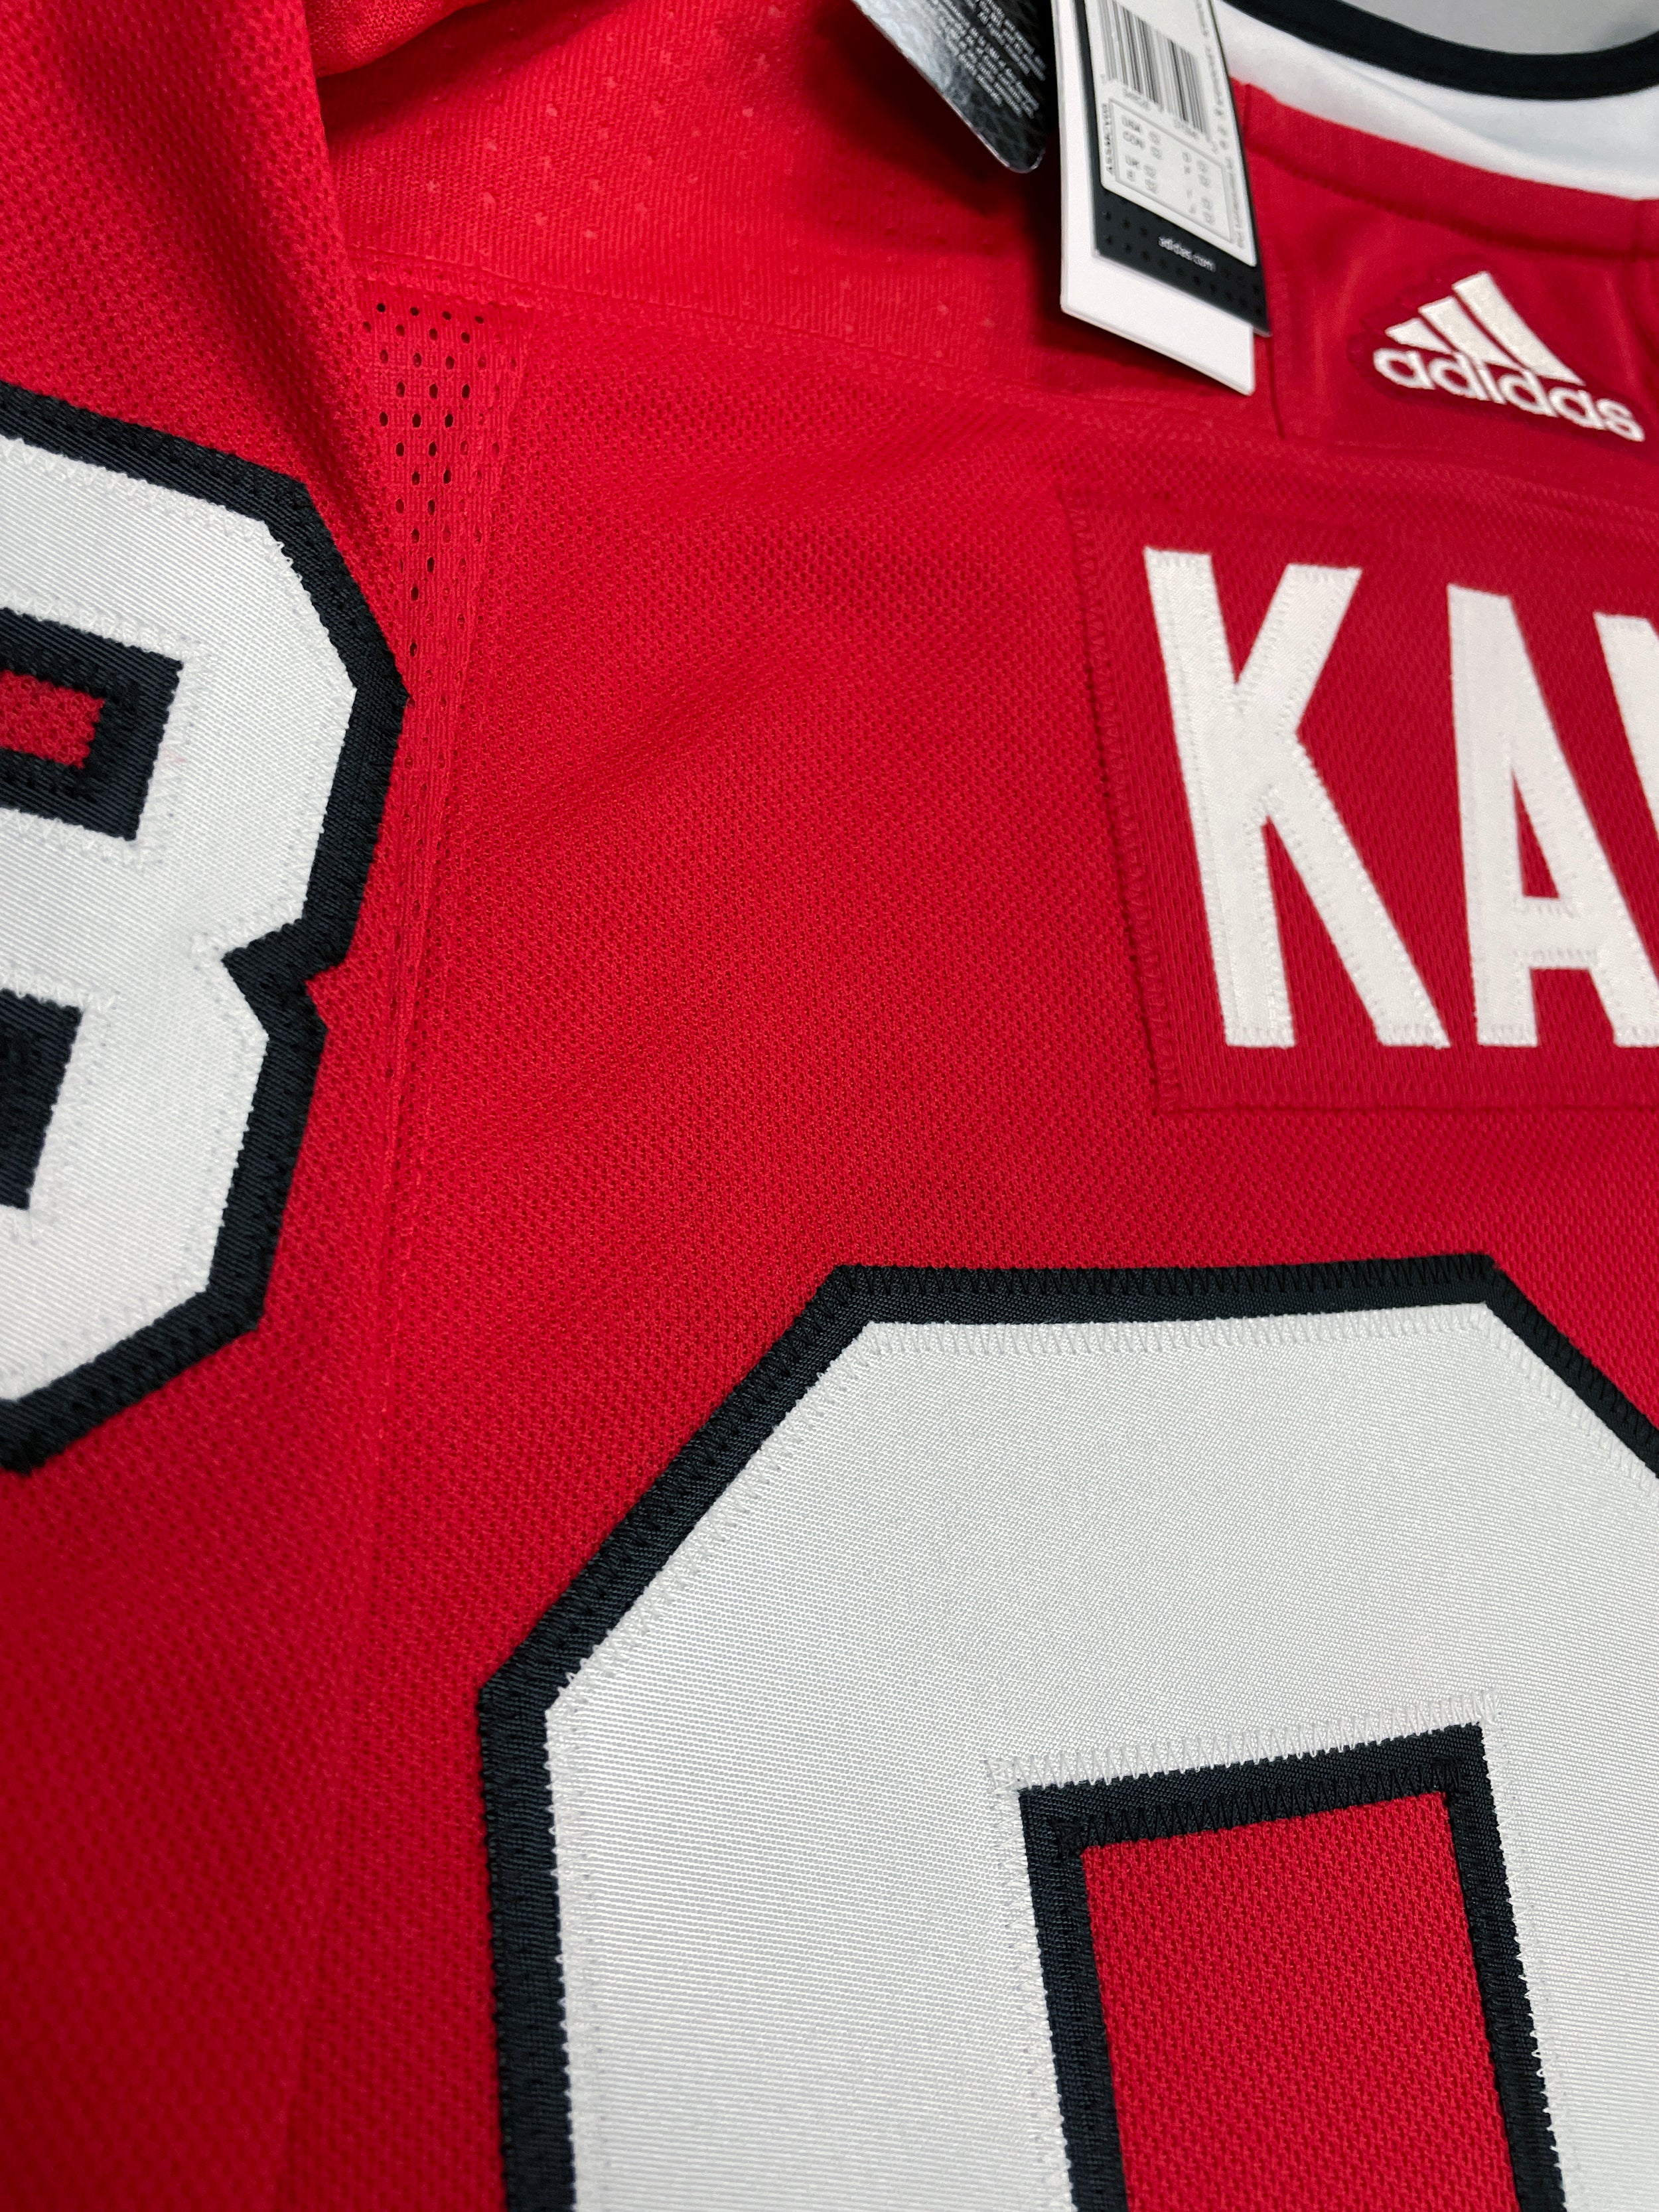 Adidas Does The Impossible and Makes The Blackhawks Jersey Collars